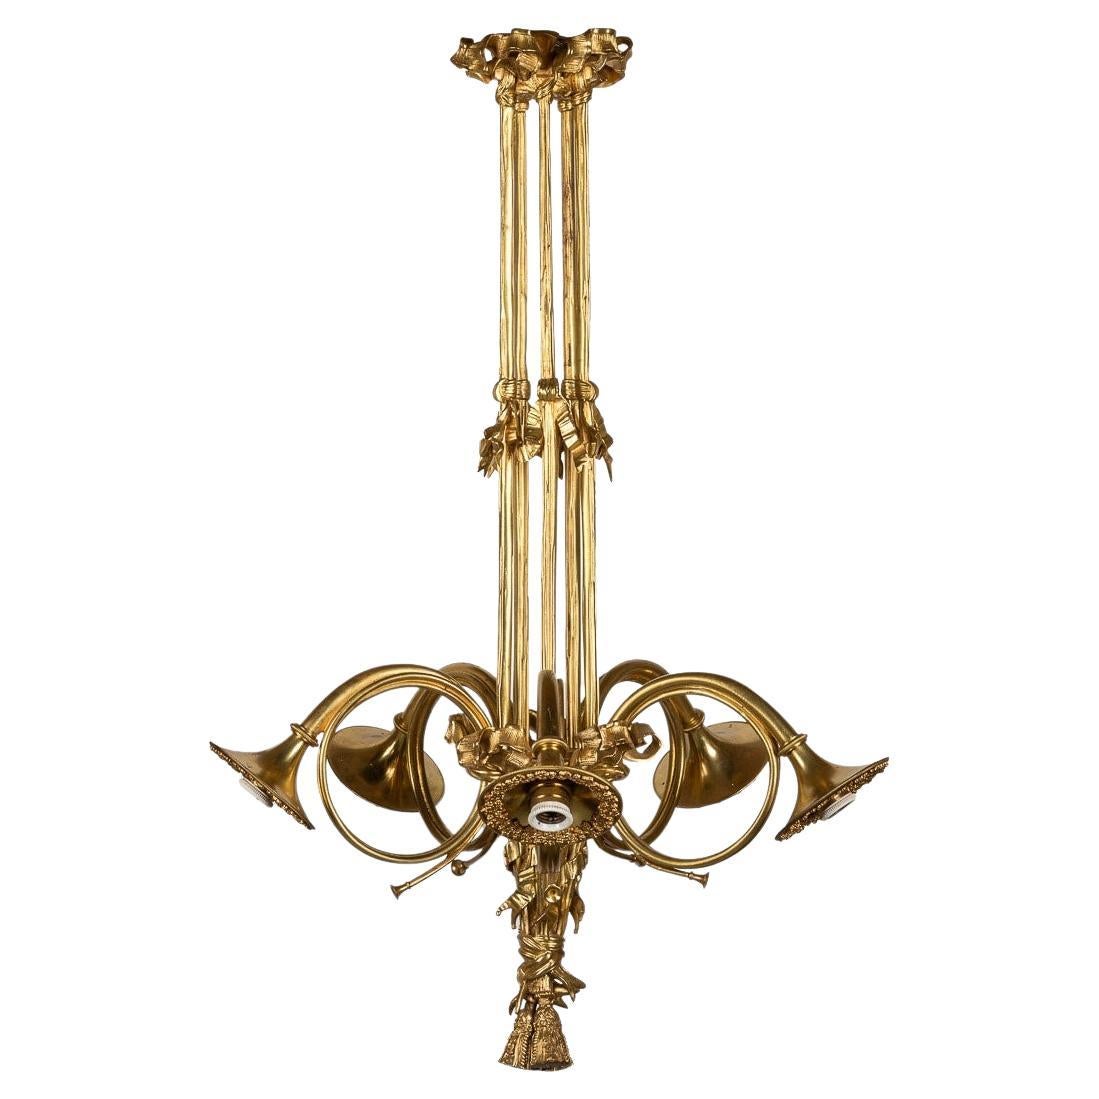 19th Century French Empire Ormolu Chandelier With Trumpet Light Fittings, c.1870 For Sale